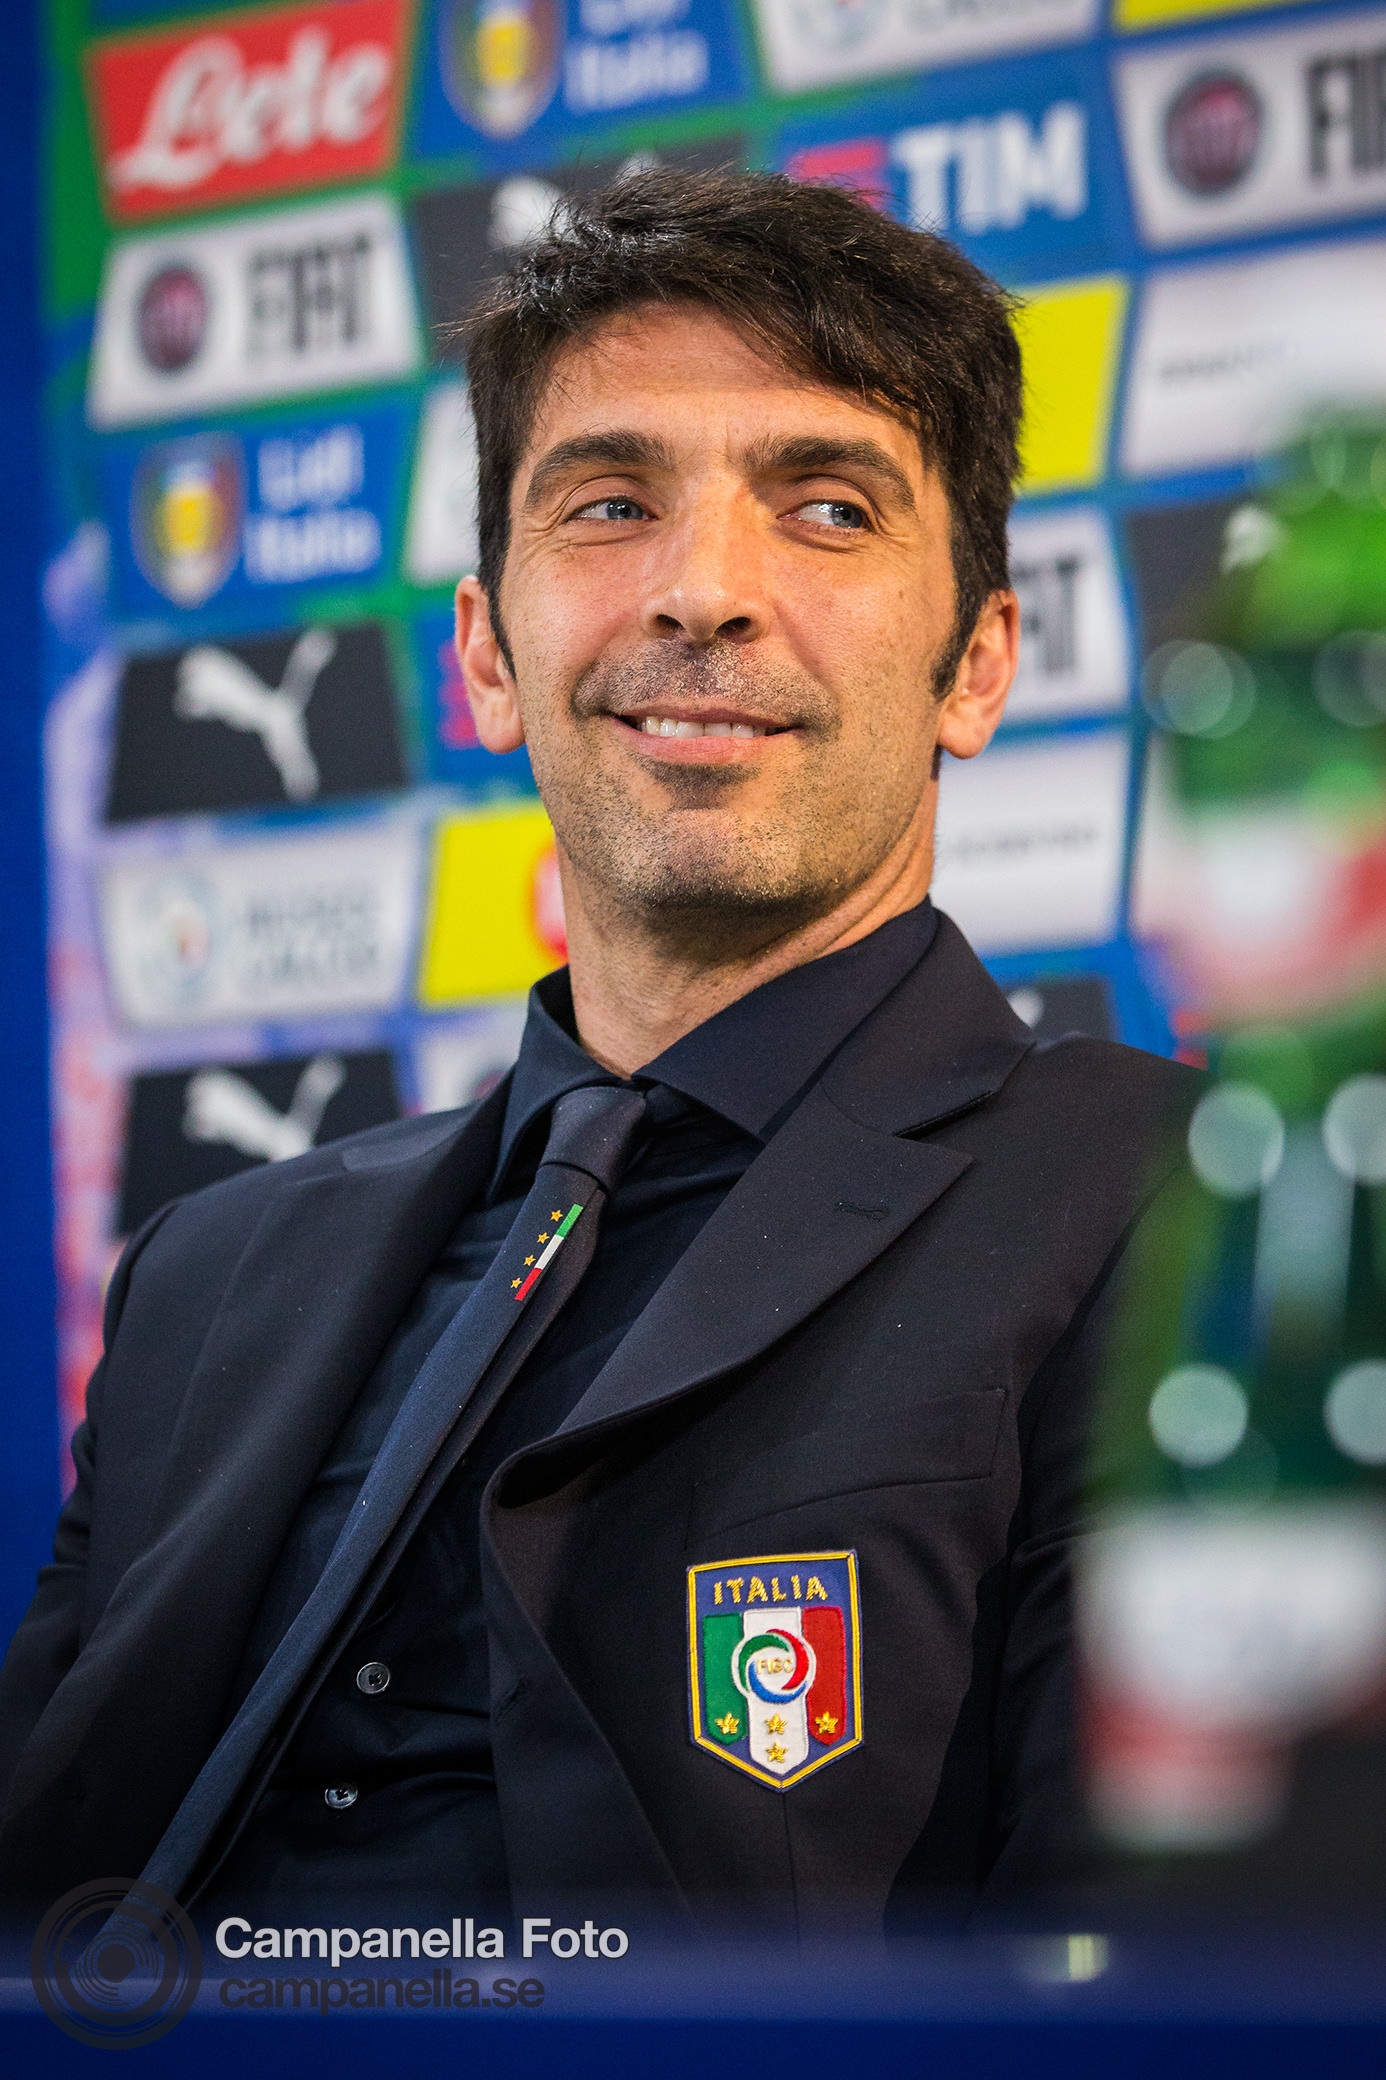 Tomorrow Italy meets Spain in Udine - Michael Campanella Photography